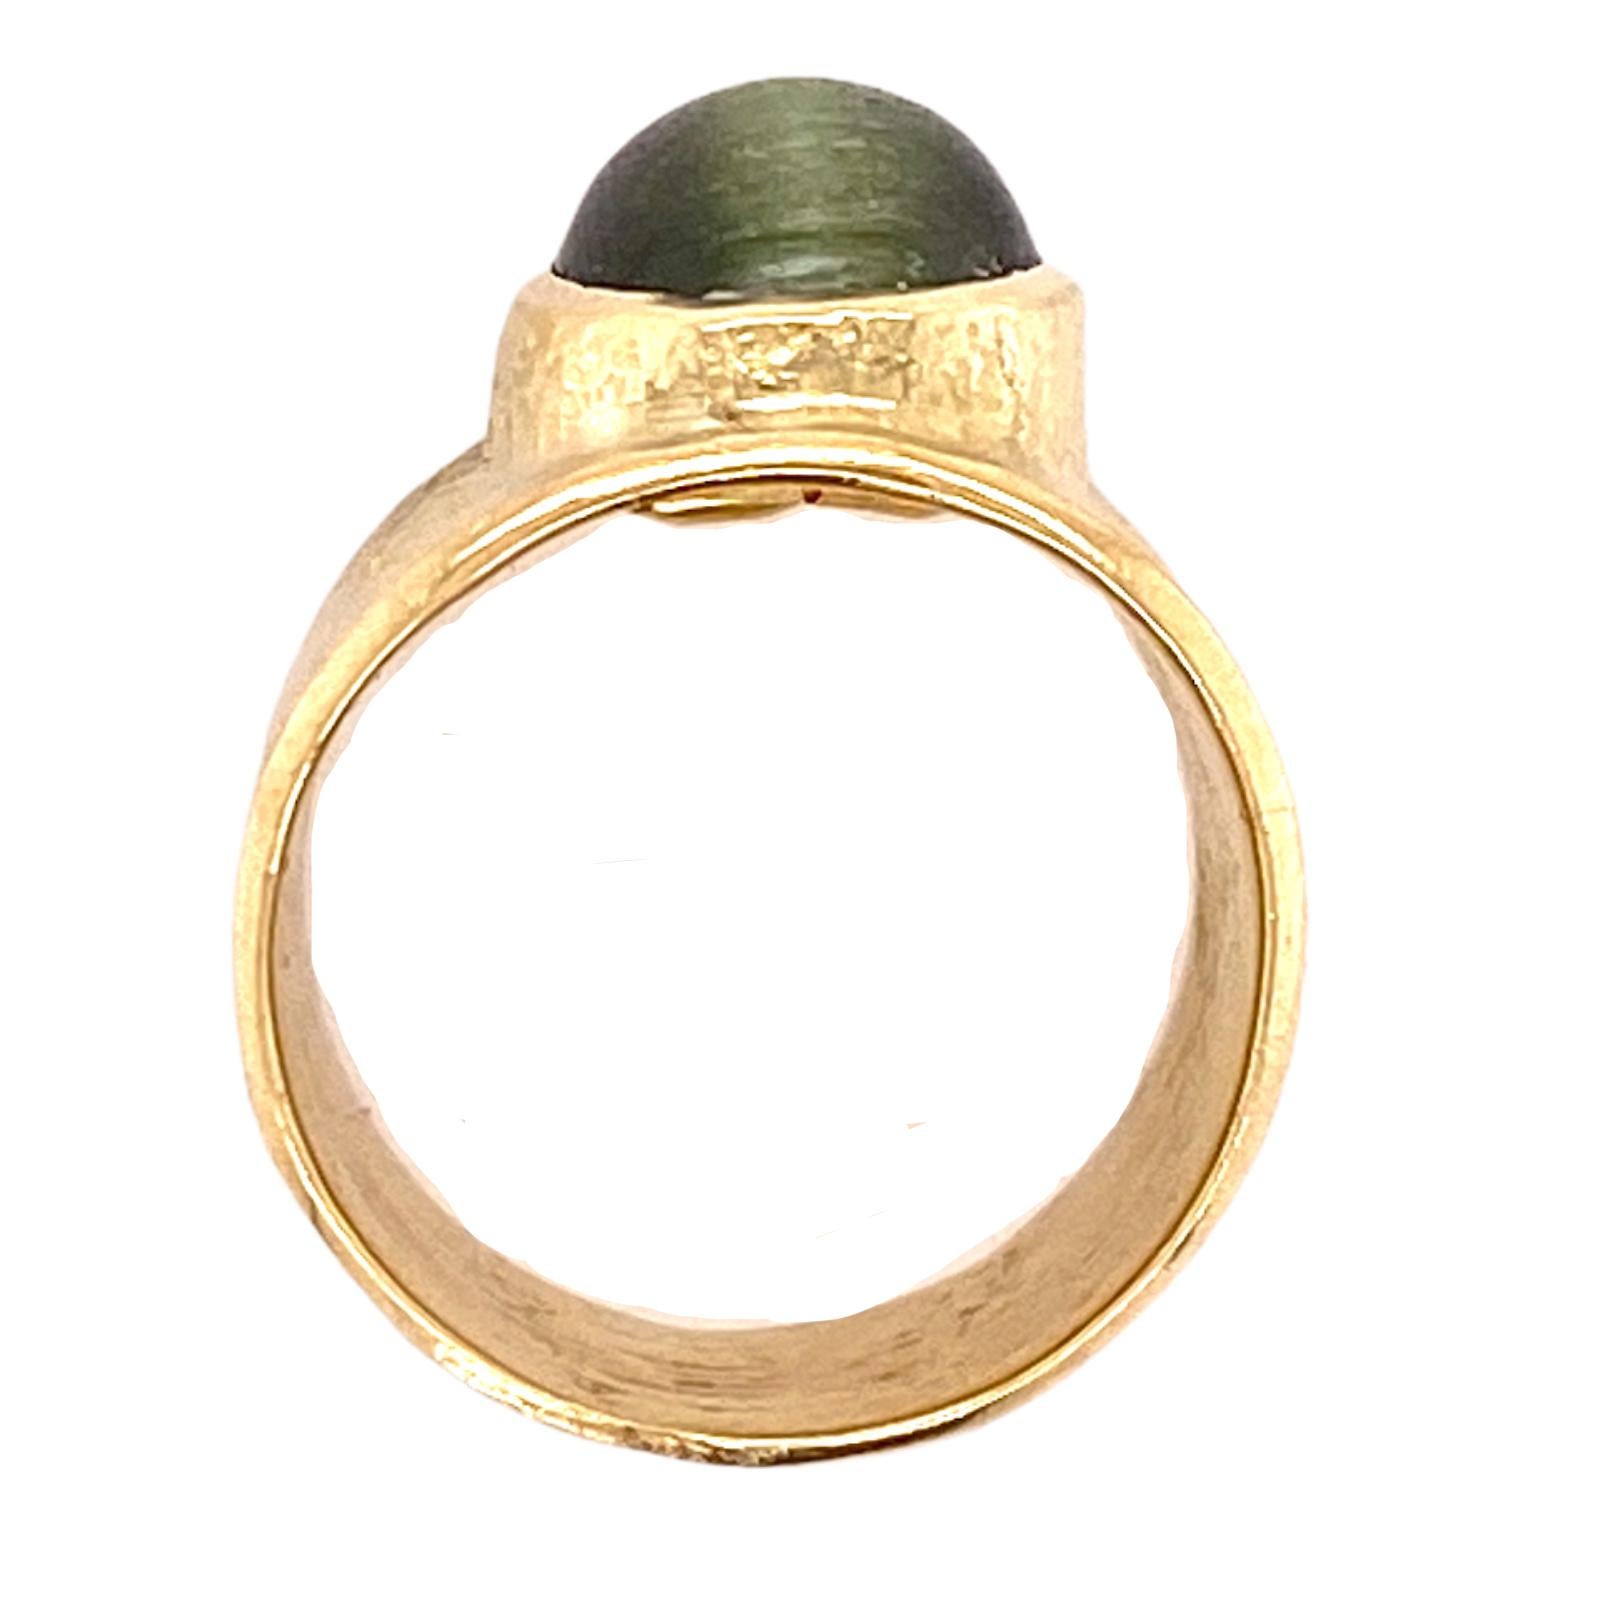 Contemporary Cat's Eye 18 Karat Yellow Hammered Gold Wide Band Vintage Ring Signed Eveli